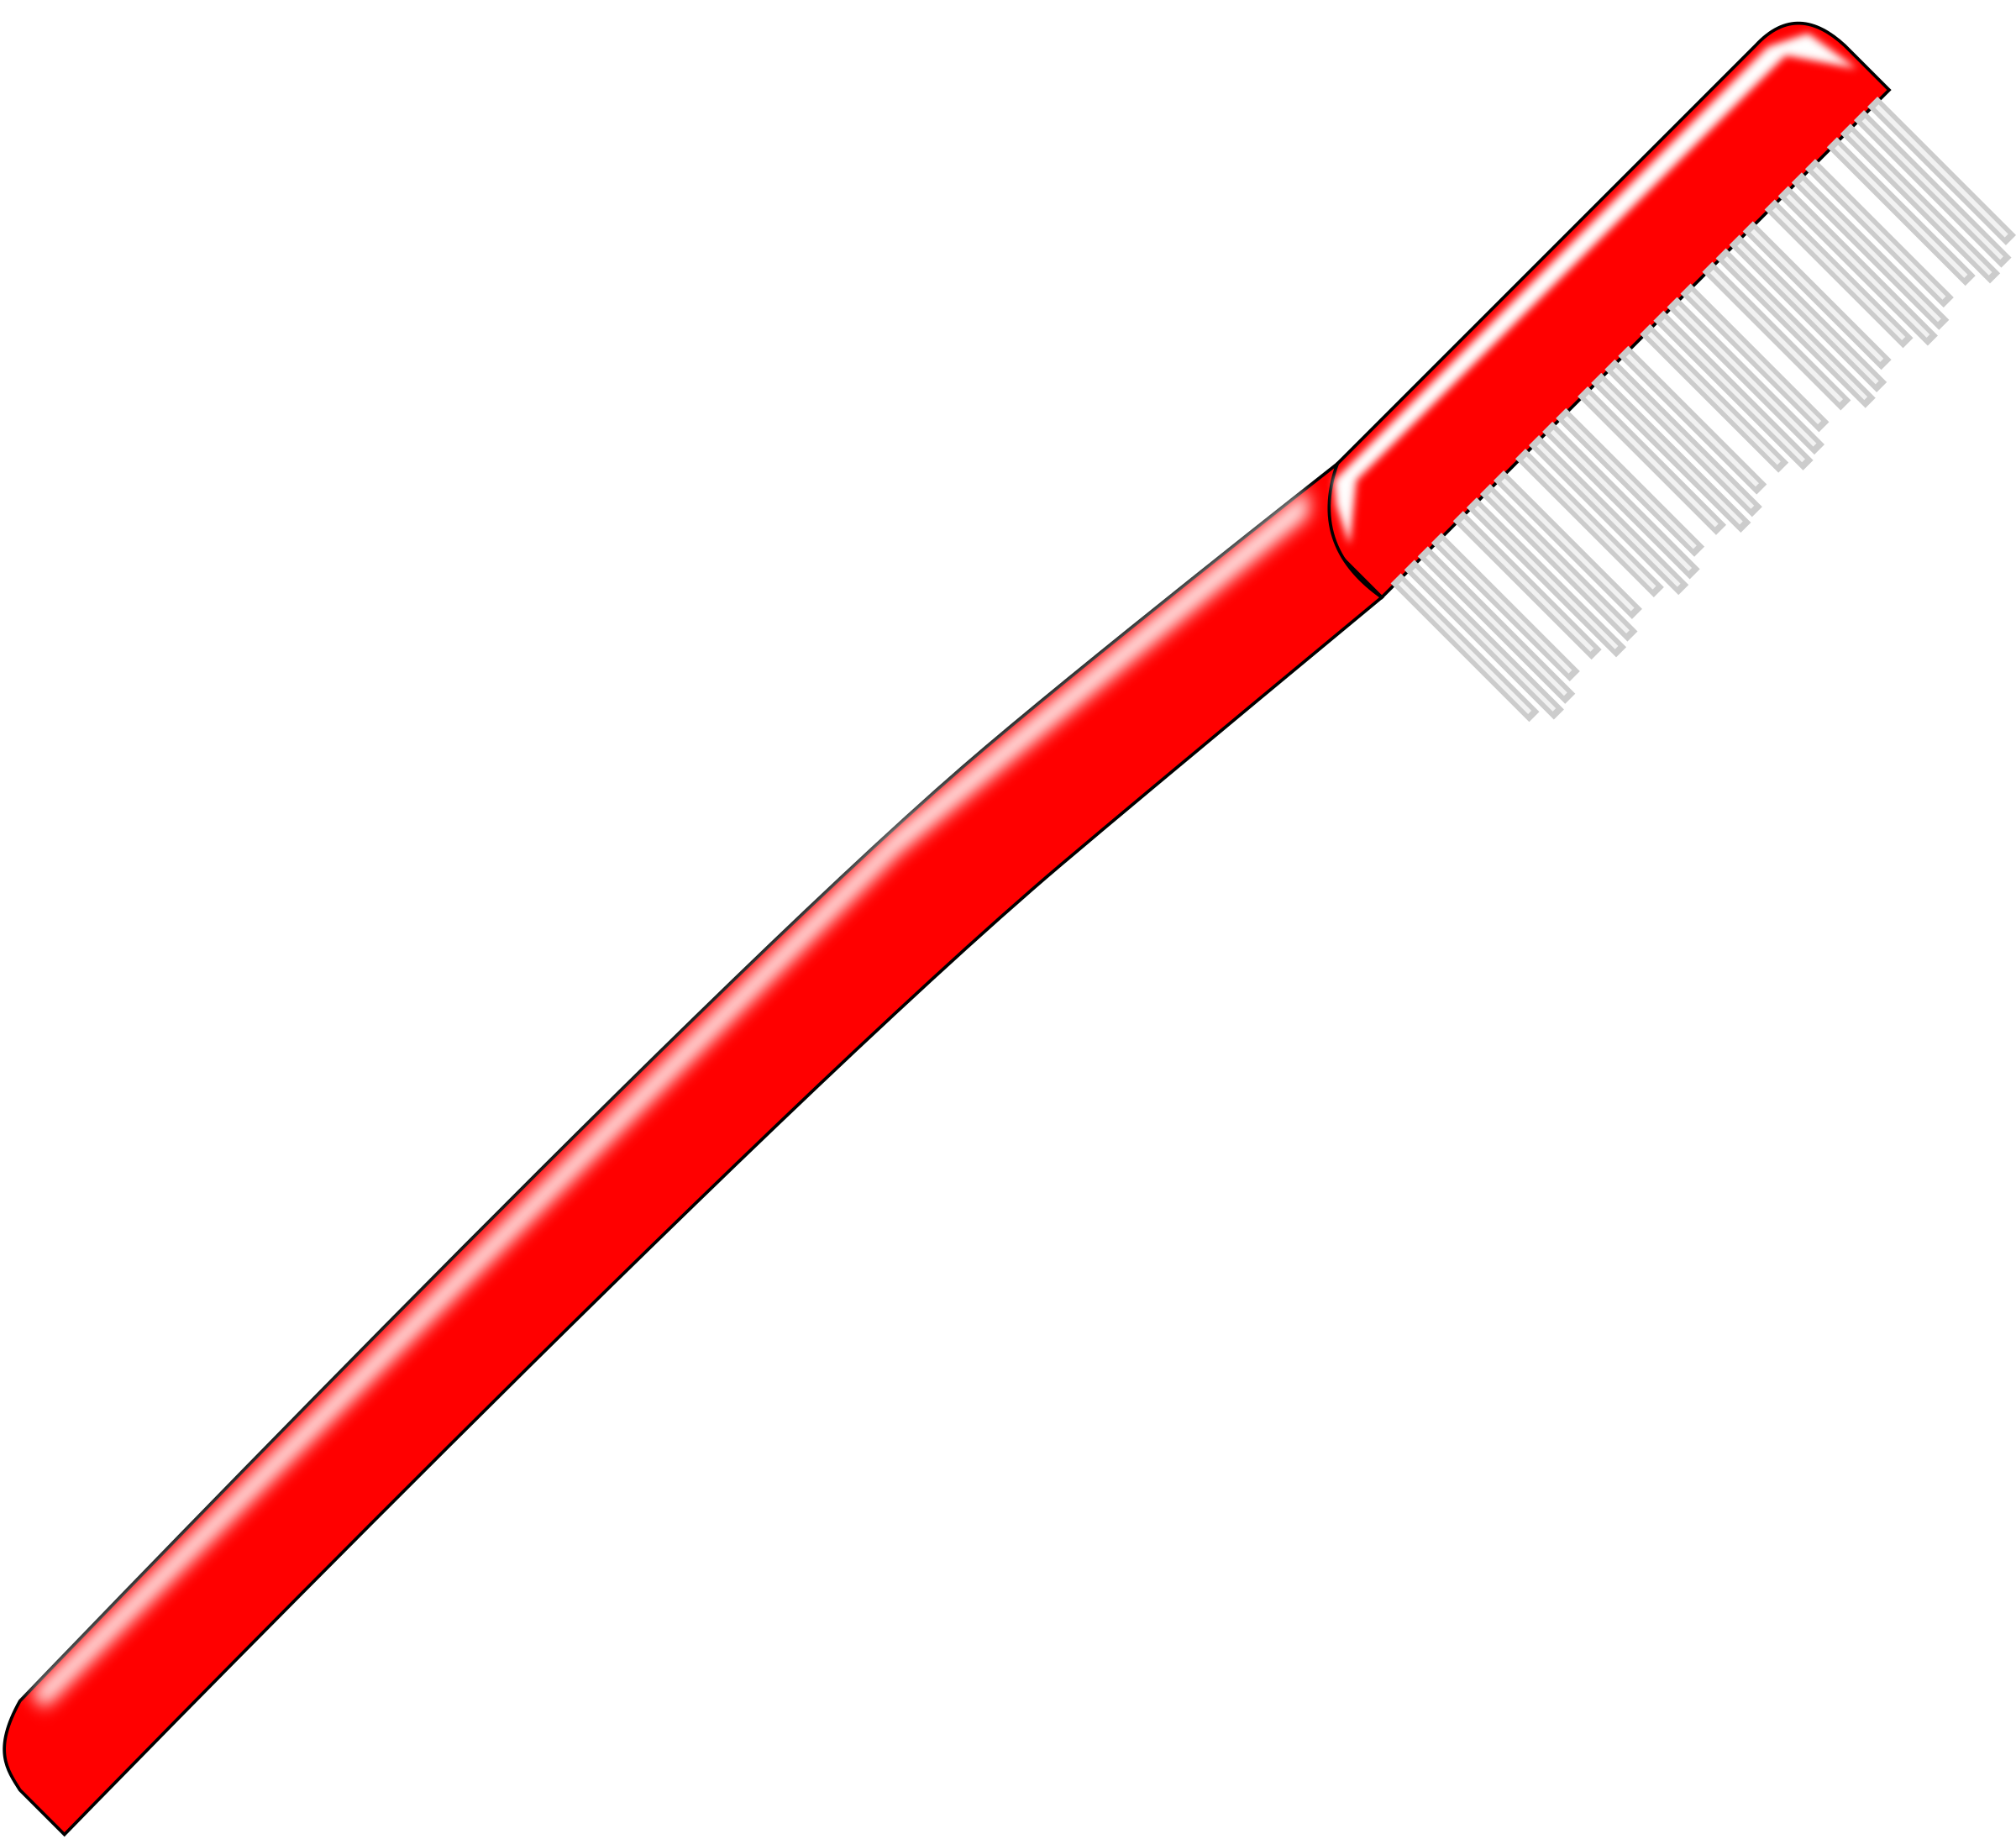 Toothbrush clipart #6, Download drawings